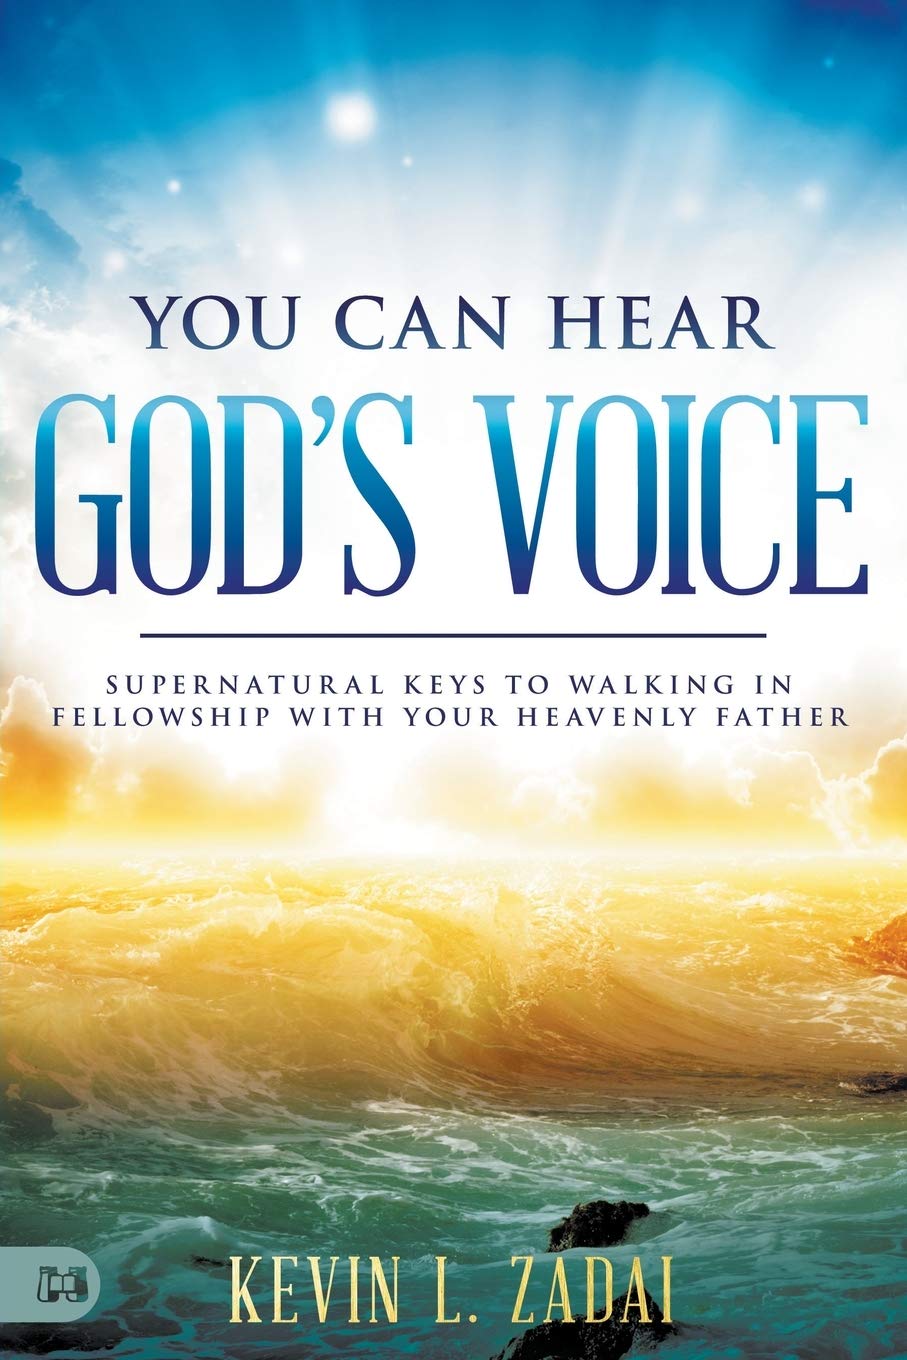 You Can Hear God's Voice: Supernatural Keys To Walking In Fellowship With Your Heavenly Father